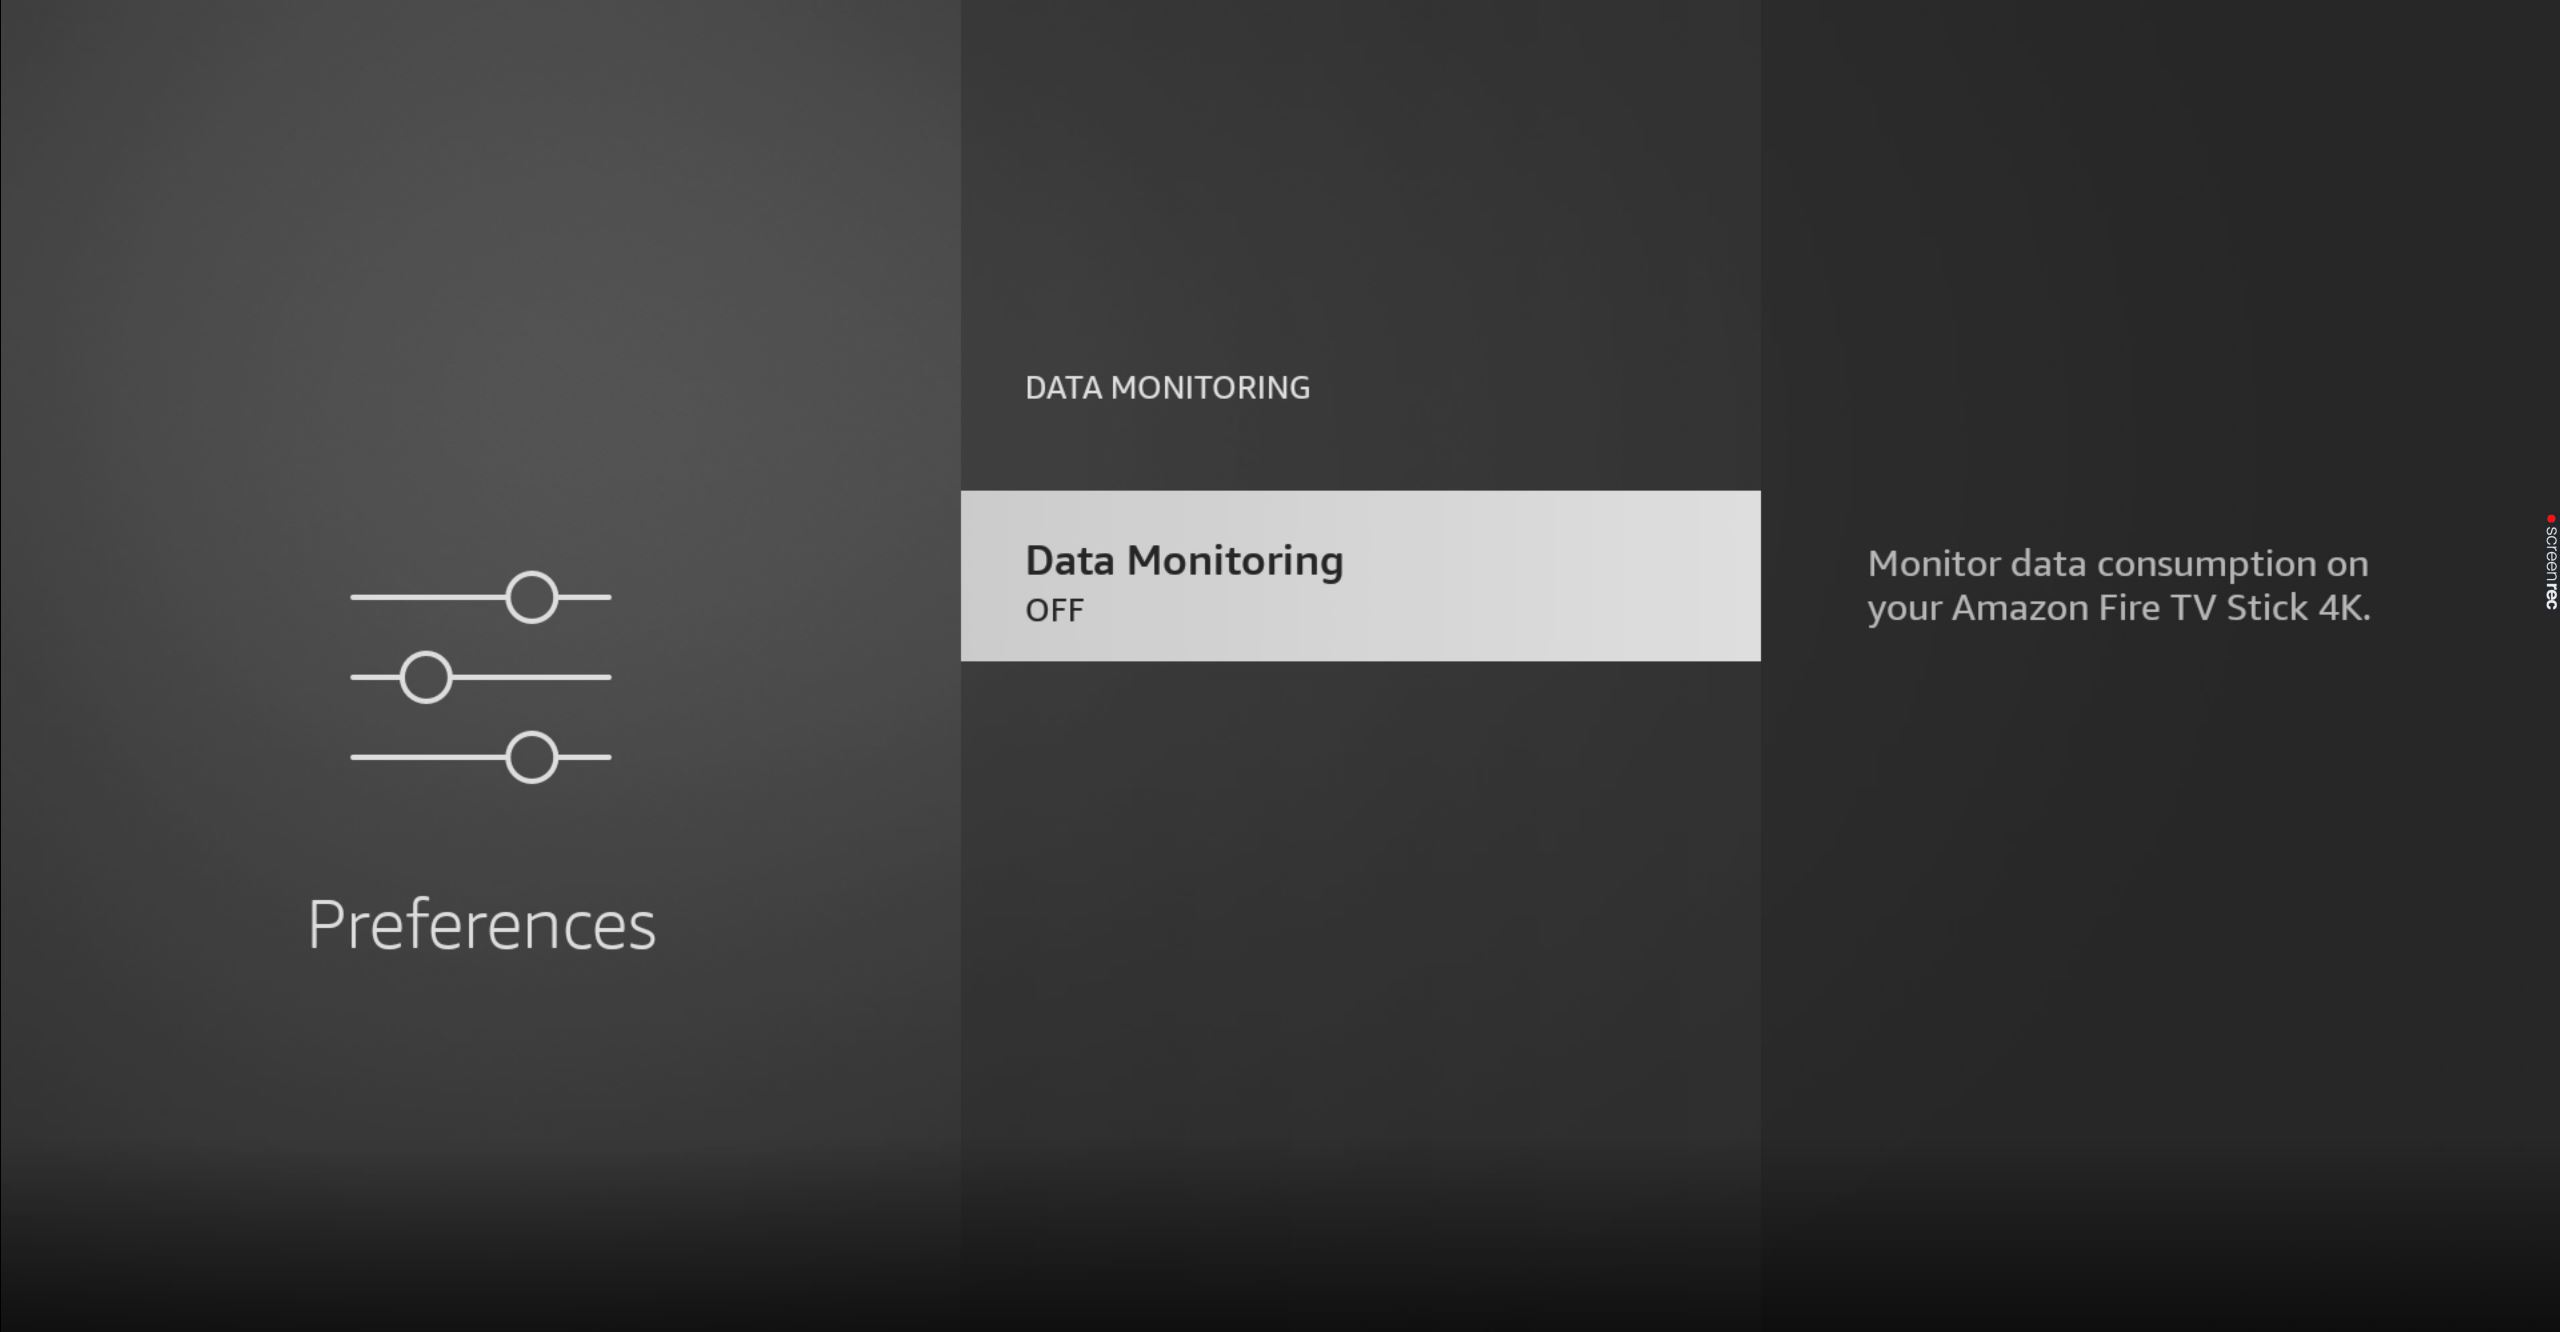 How to turn off Data Monitoring on Amazon Firestick